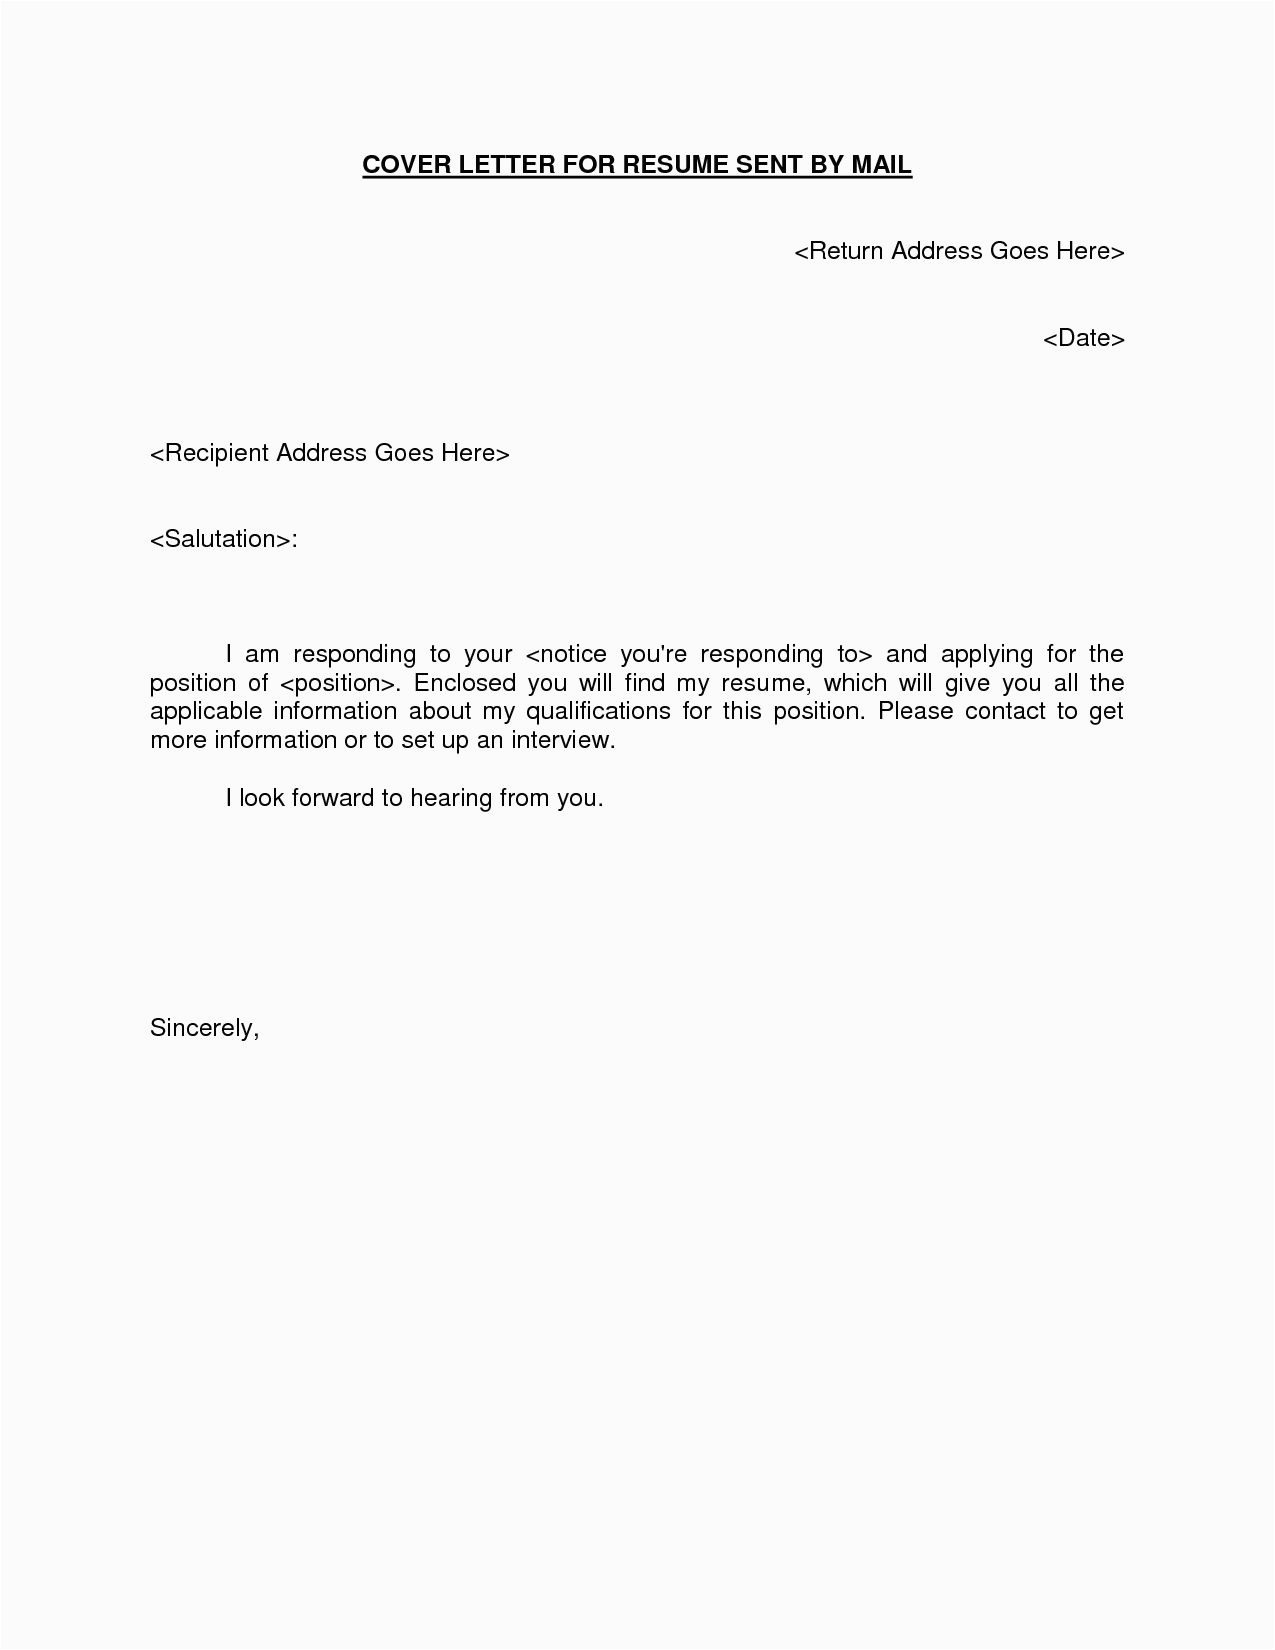 Sample Email to Send Resume and Cover Letter for Job 25 Email Cover Letter